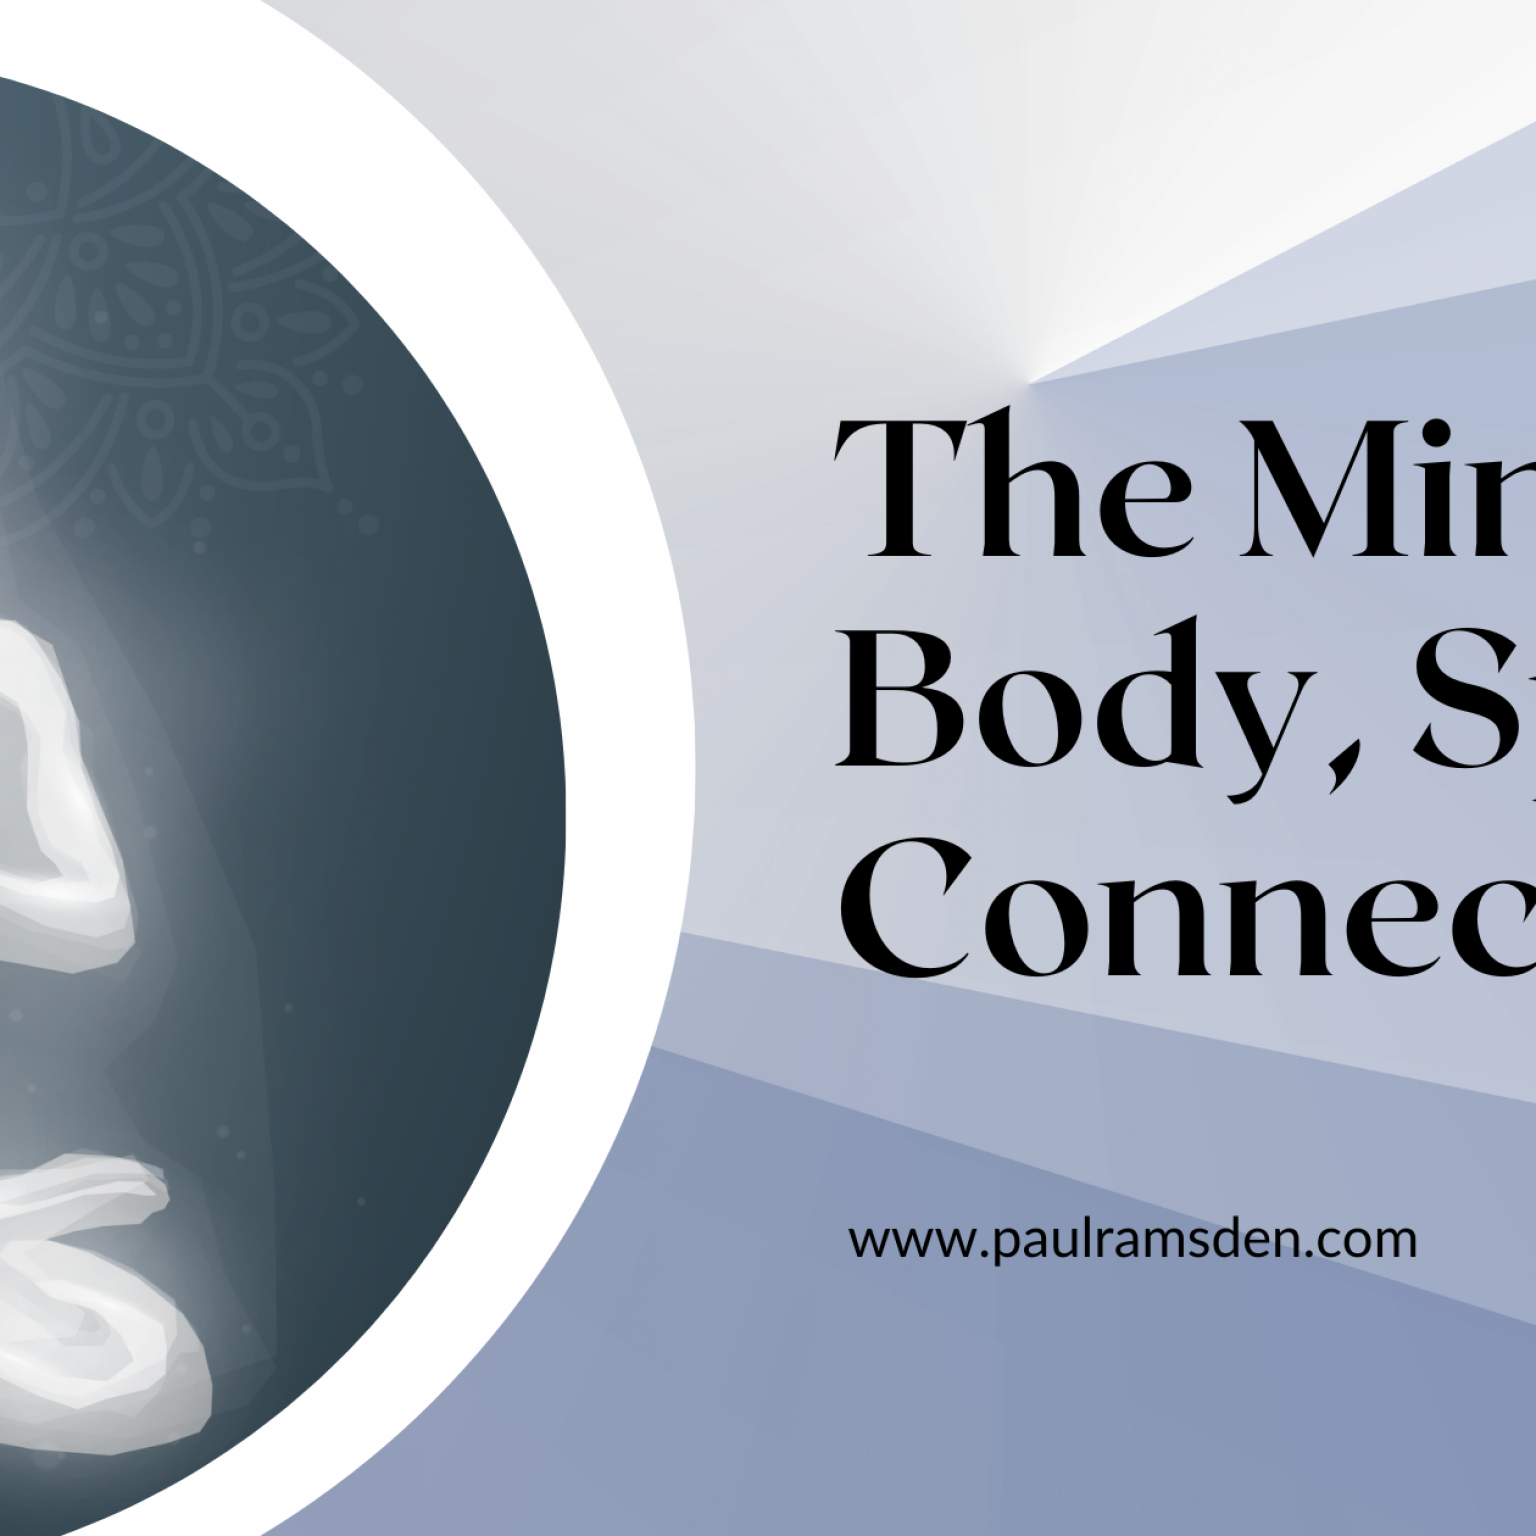 The Mind-Body-Soul-Spirit Connection